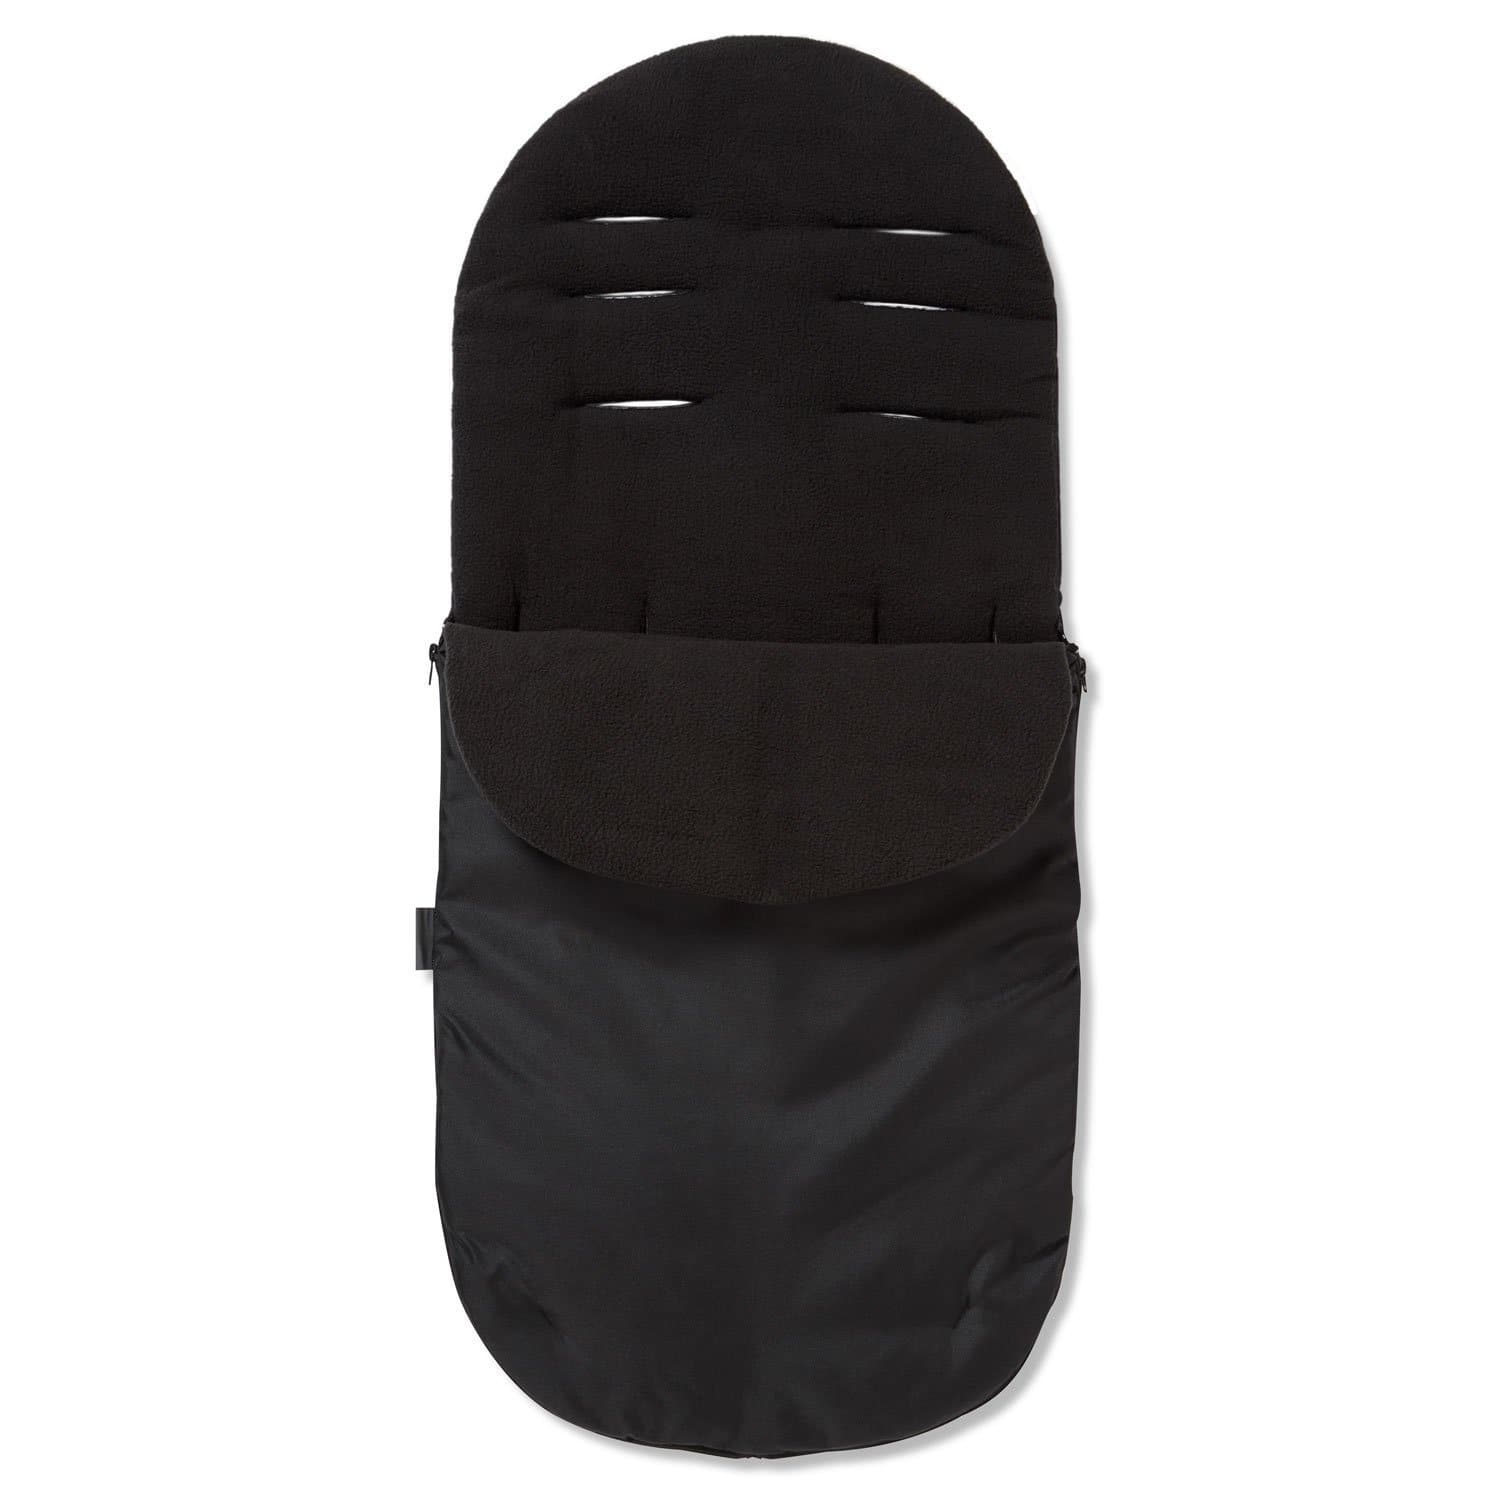 Footmuff / Cosy Toes Compatible with Koelstra - Black / Fits All Models | For Your Little One